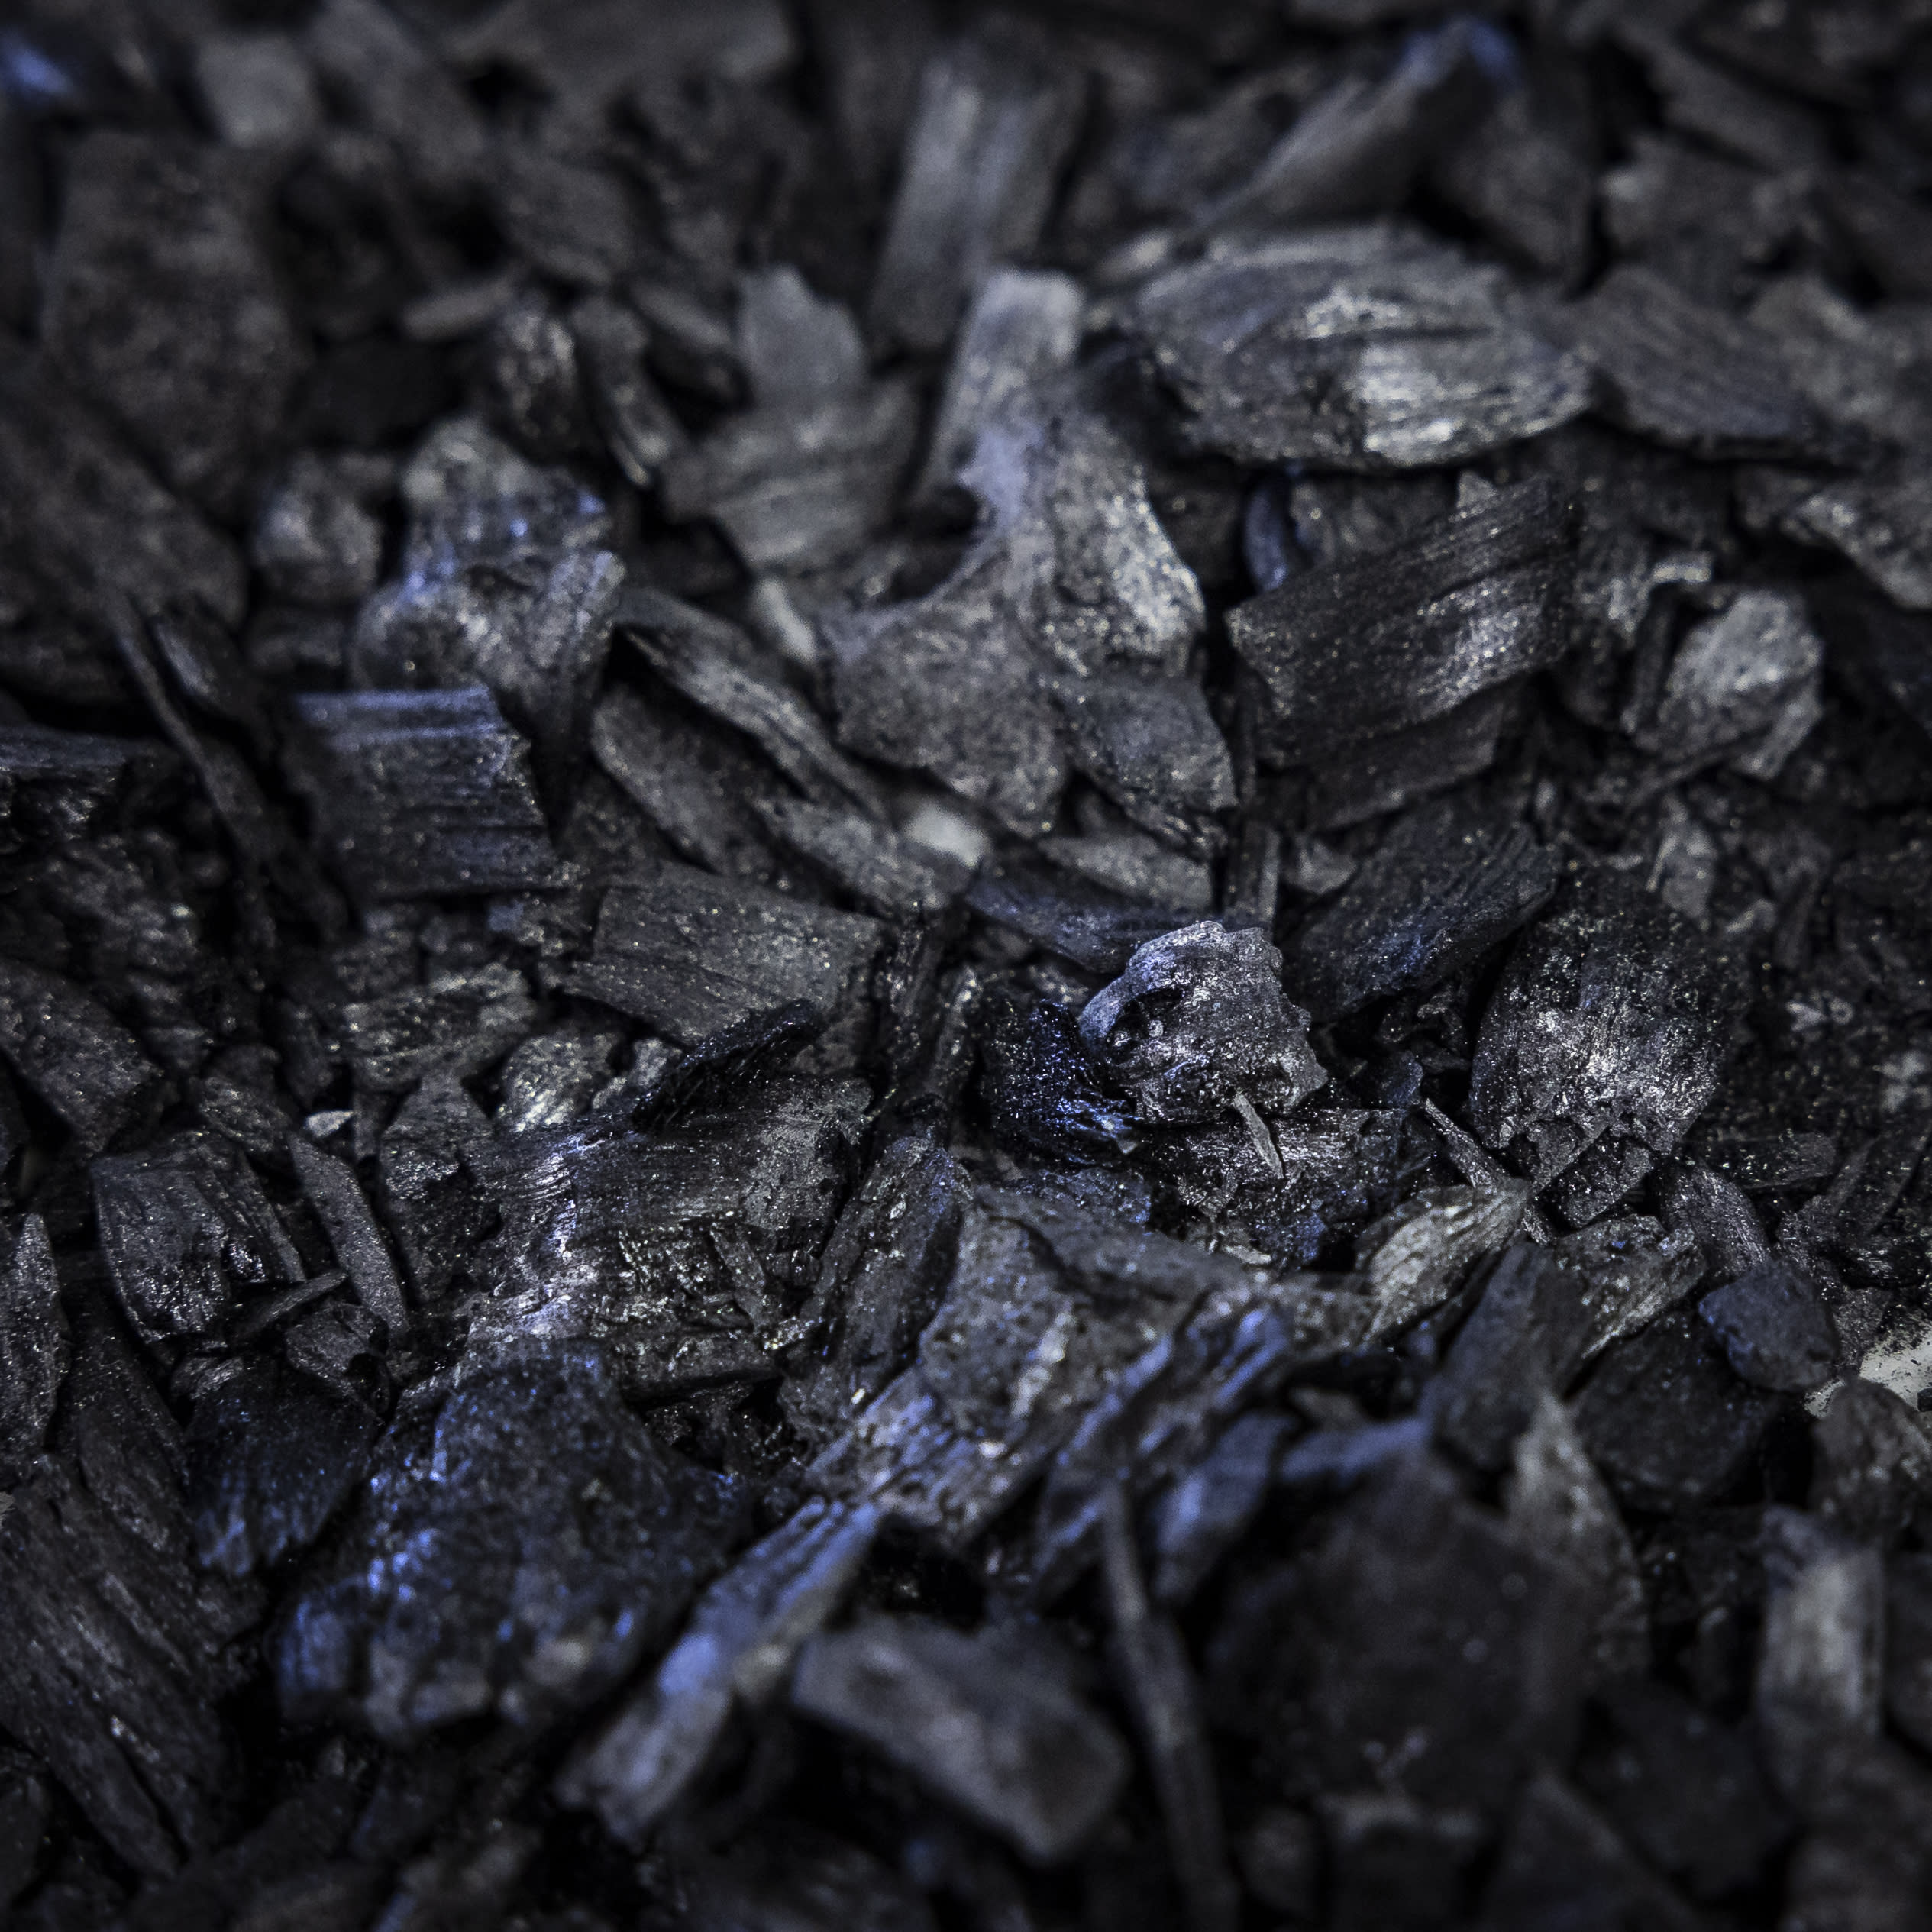 Finland’s coal consumption will increase by 8 percent